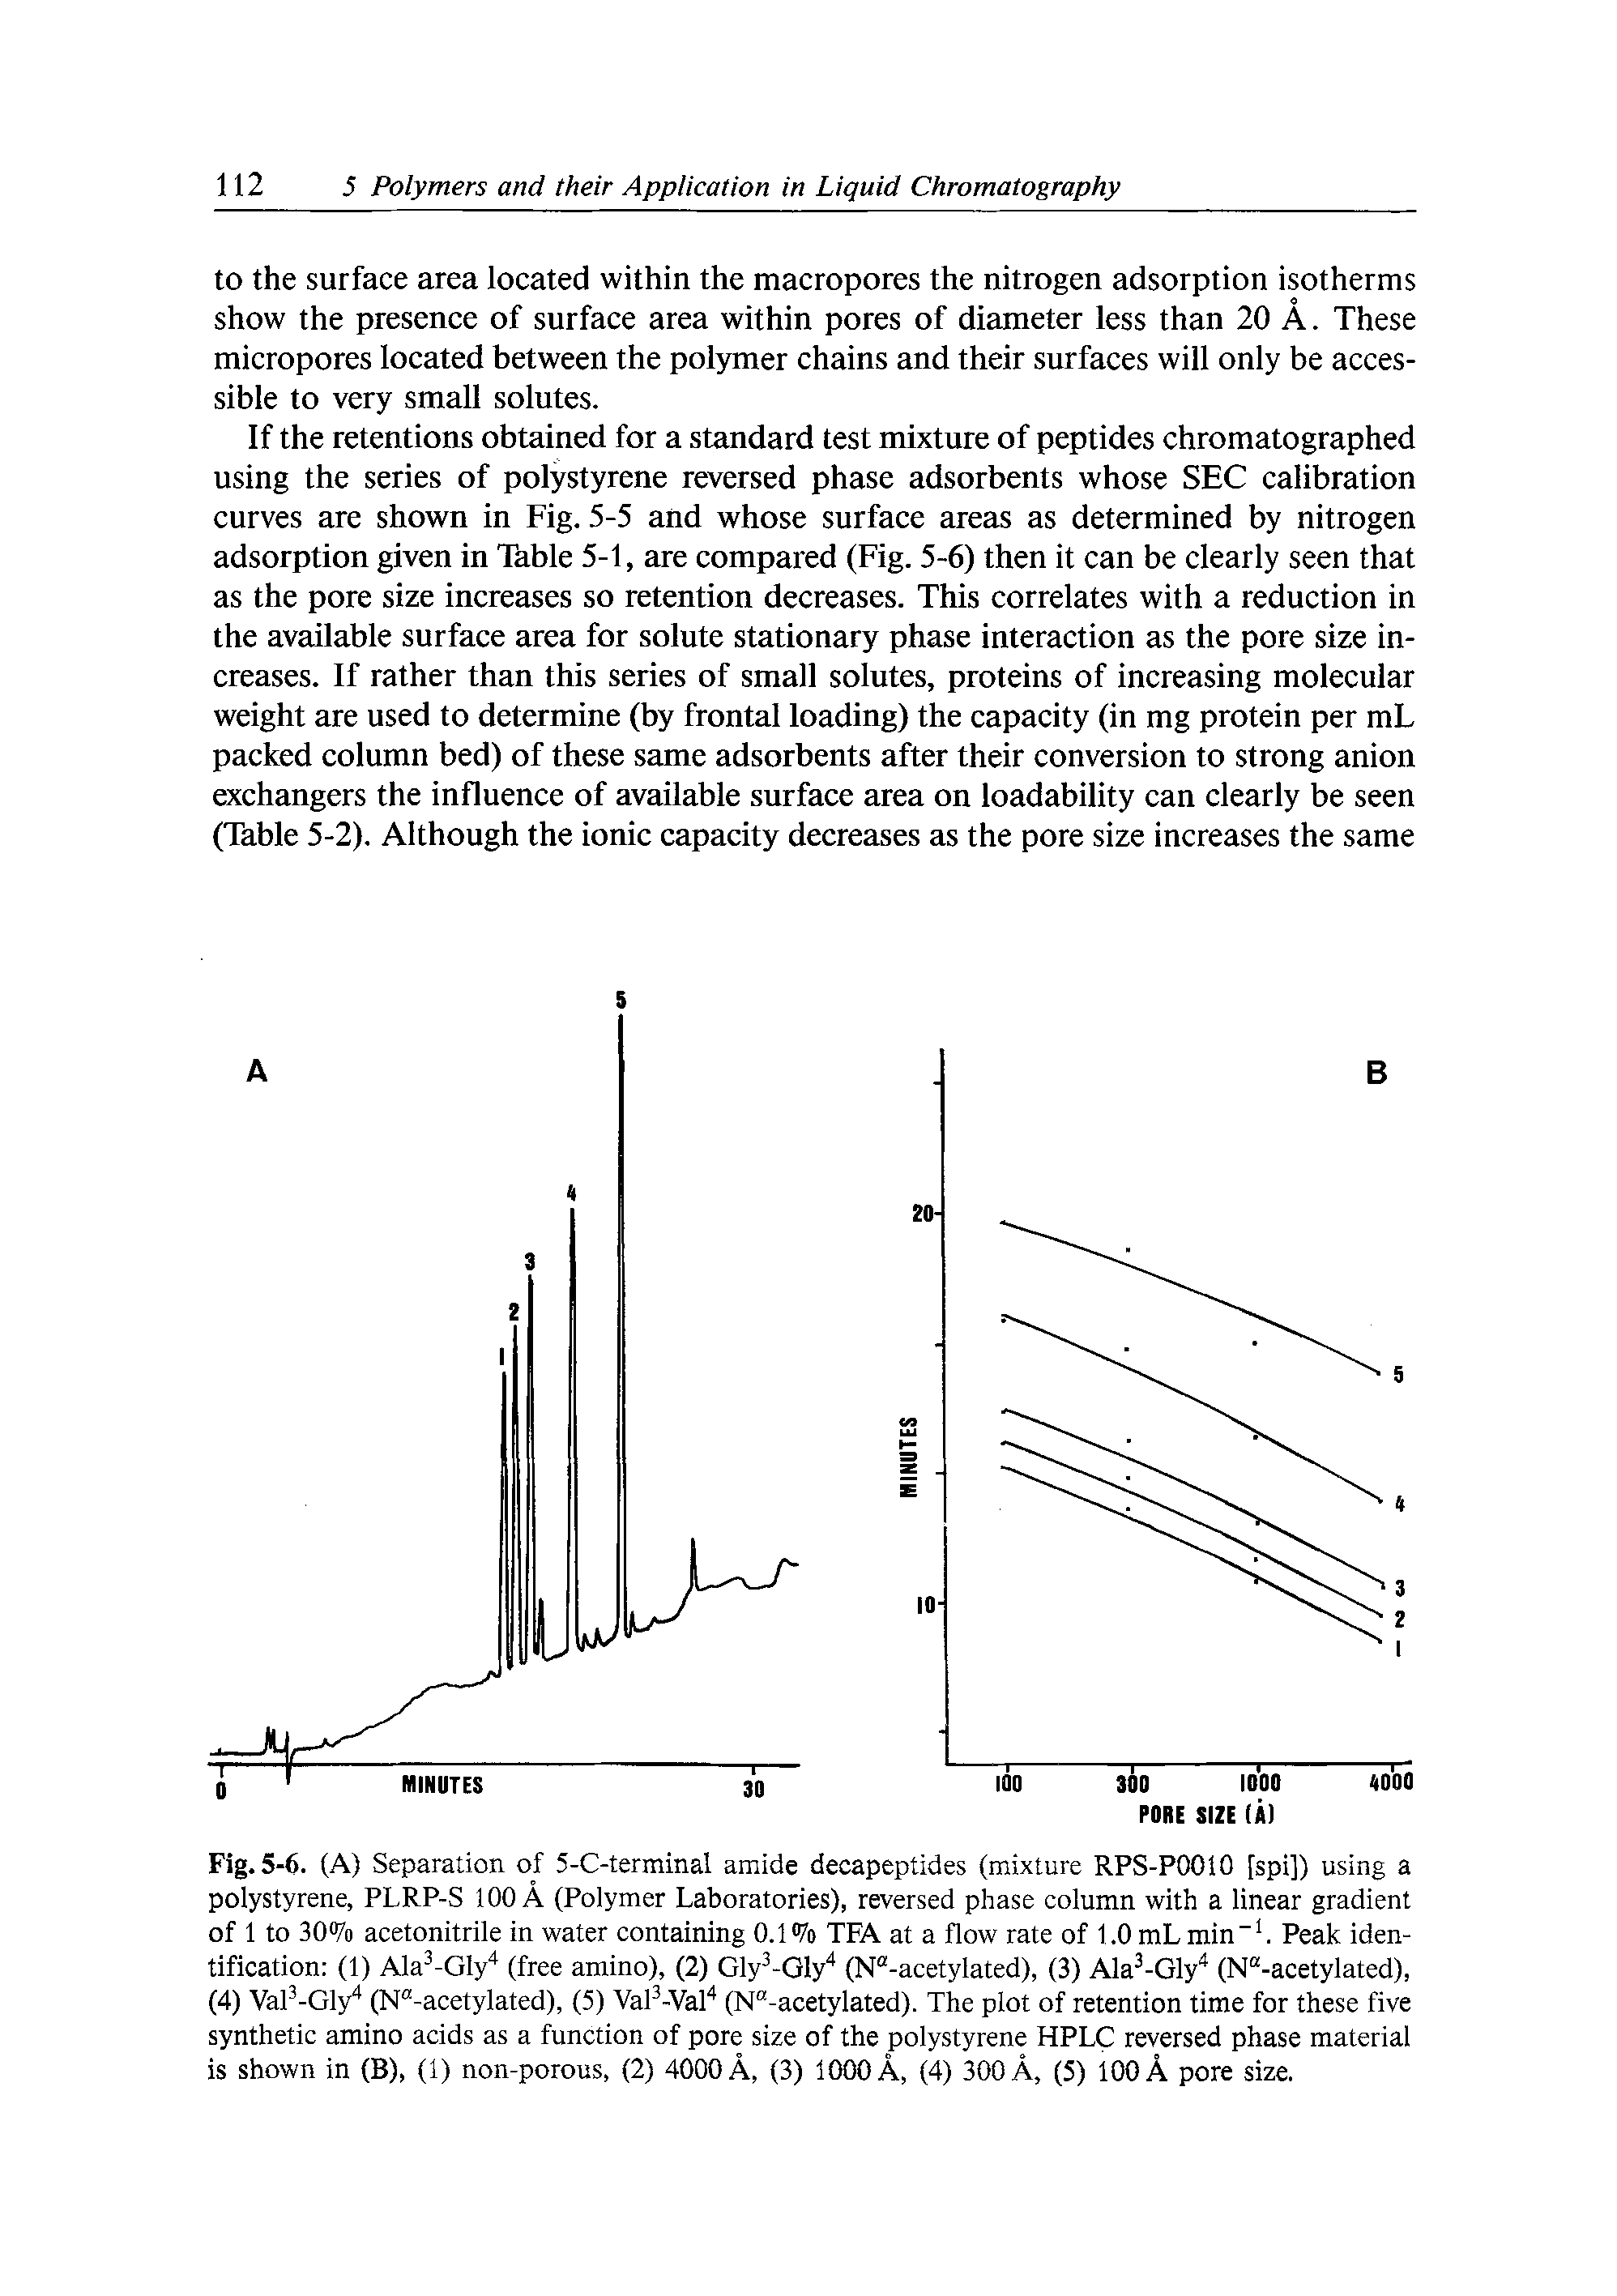 Fig. 5-6. (A) Separation of 5-C-terininal amide decapeptides (mixture RPS-POOIO [spi]) using a polystyrene, PLRP-S 100 A (Polymer Laboratories), reversed phase column with a linear gradient of 1 to 30% acetonitrile in water containing 0.1% TFA at a flow rate of l.OmLmin . Peak identification (1) Ala -Gly (free amino), (2) Gly -Oly (N -acetylated), (3) Ala -Gly (N -acetylated), (4) Val -Gly (N -acetylated), (5) Val -VaF (N -acetylated). The plot of retention time for these five synthetic amino acids as a function of pore size of the polystyrene HPLC reversed phase material is shown in (B), (1) non-porous, (2) 4000 A, (3) 1000 A, (4) 300 A, (5) 100 A pore size.